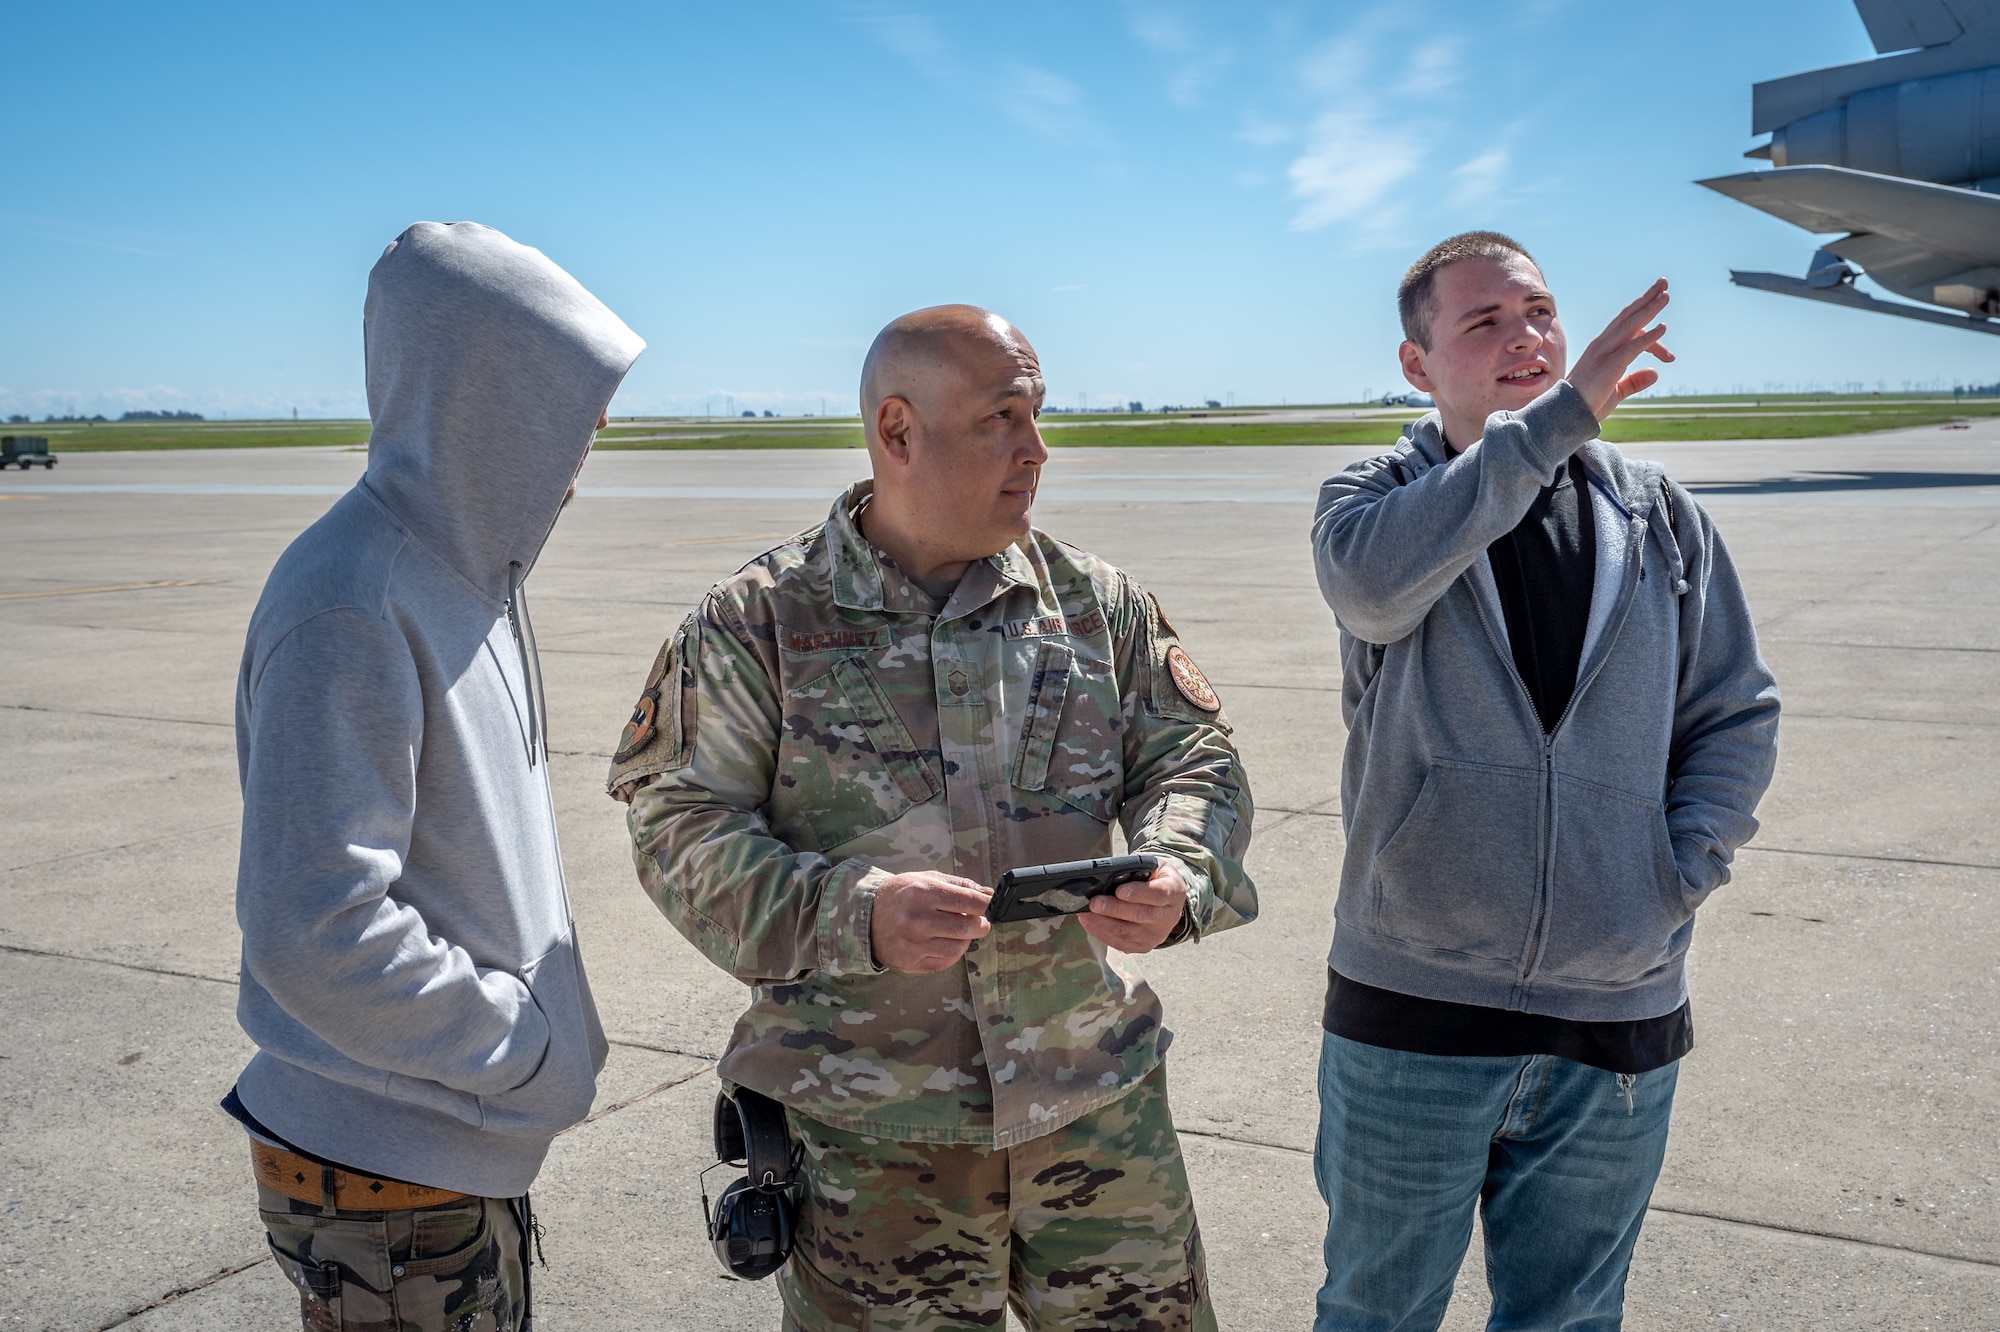 The 349th Air Mobility Wing Development and Training Flight hosted students from the local school district for a tour of Travis AFB.